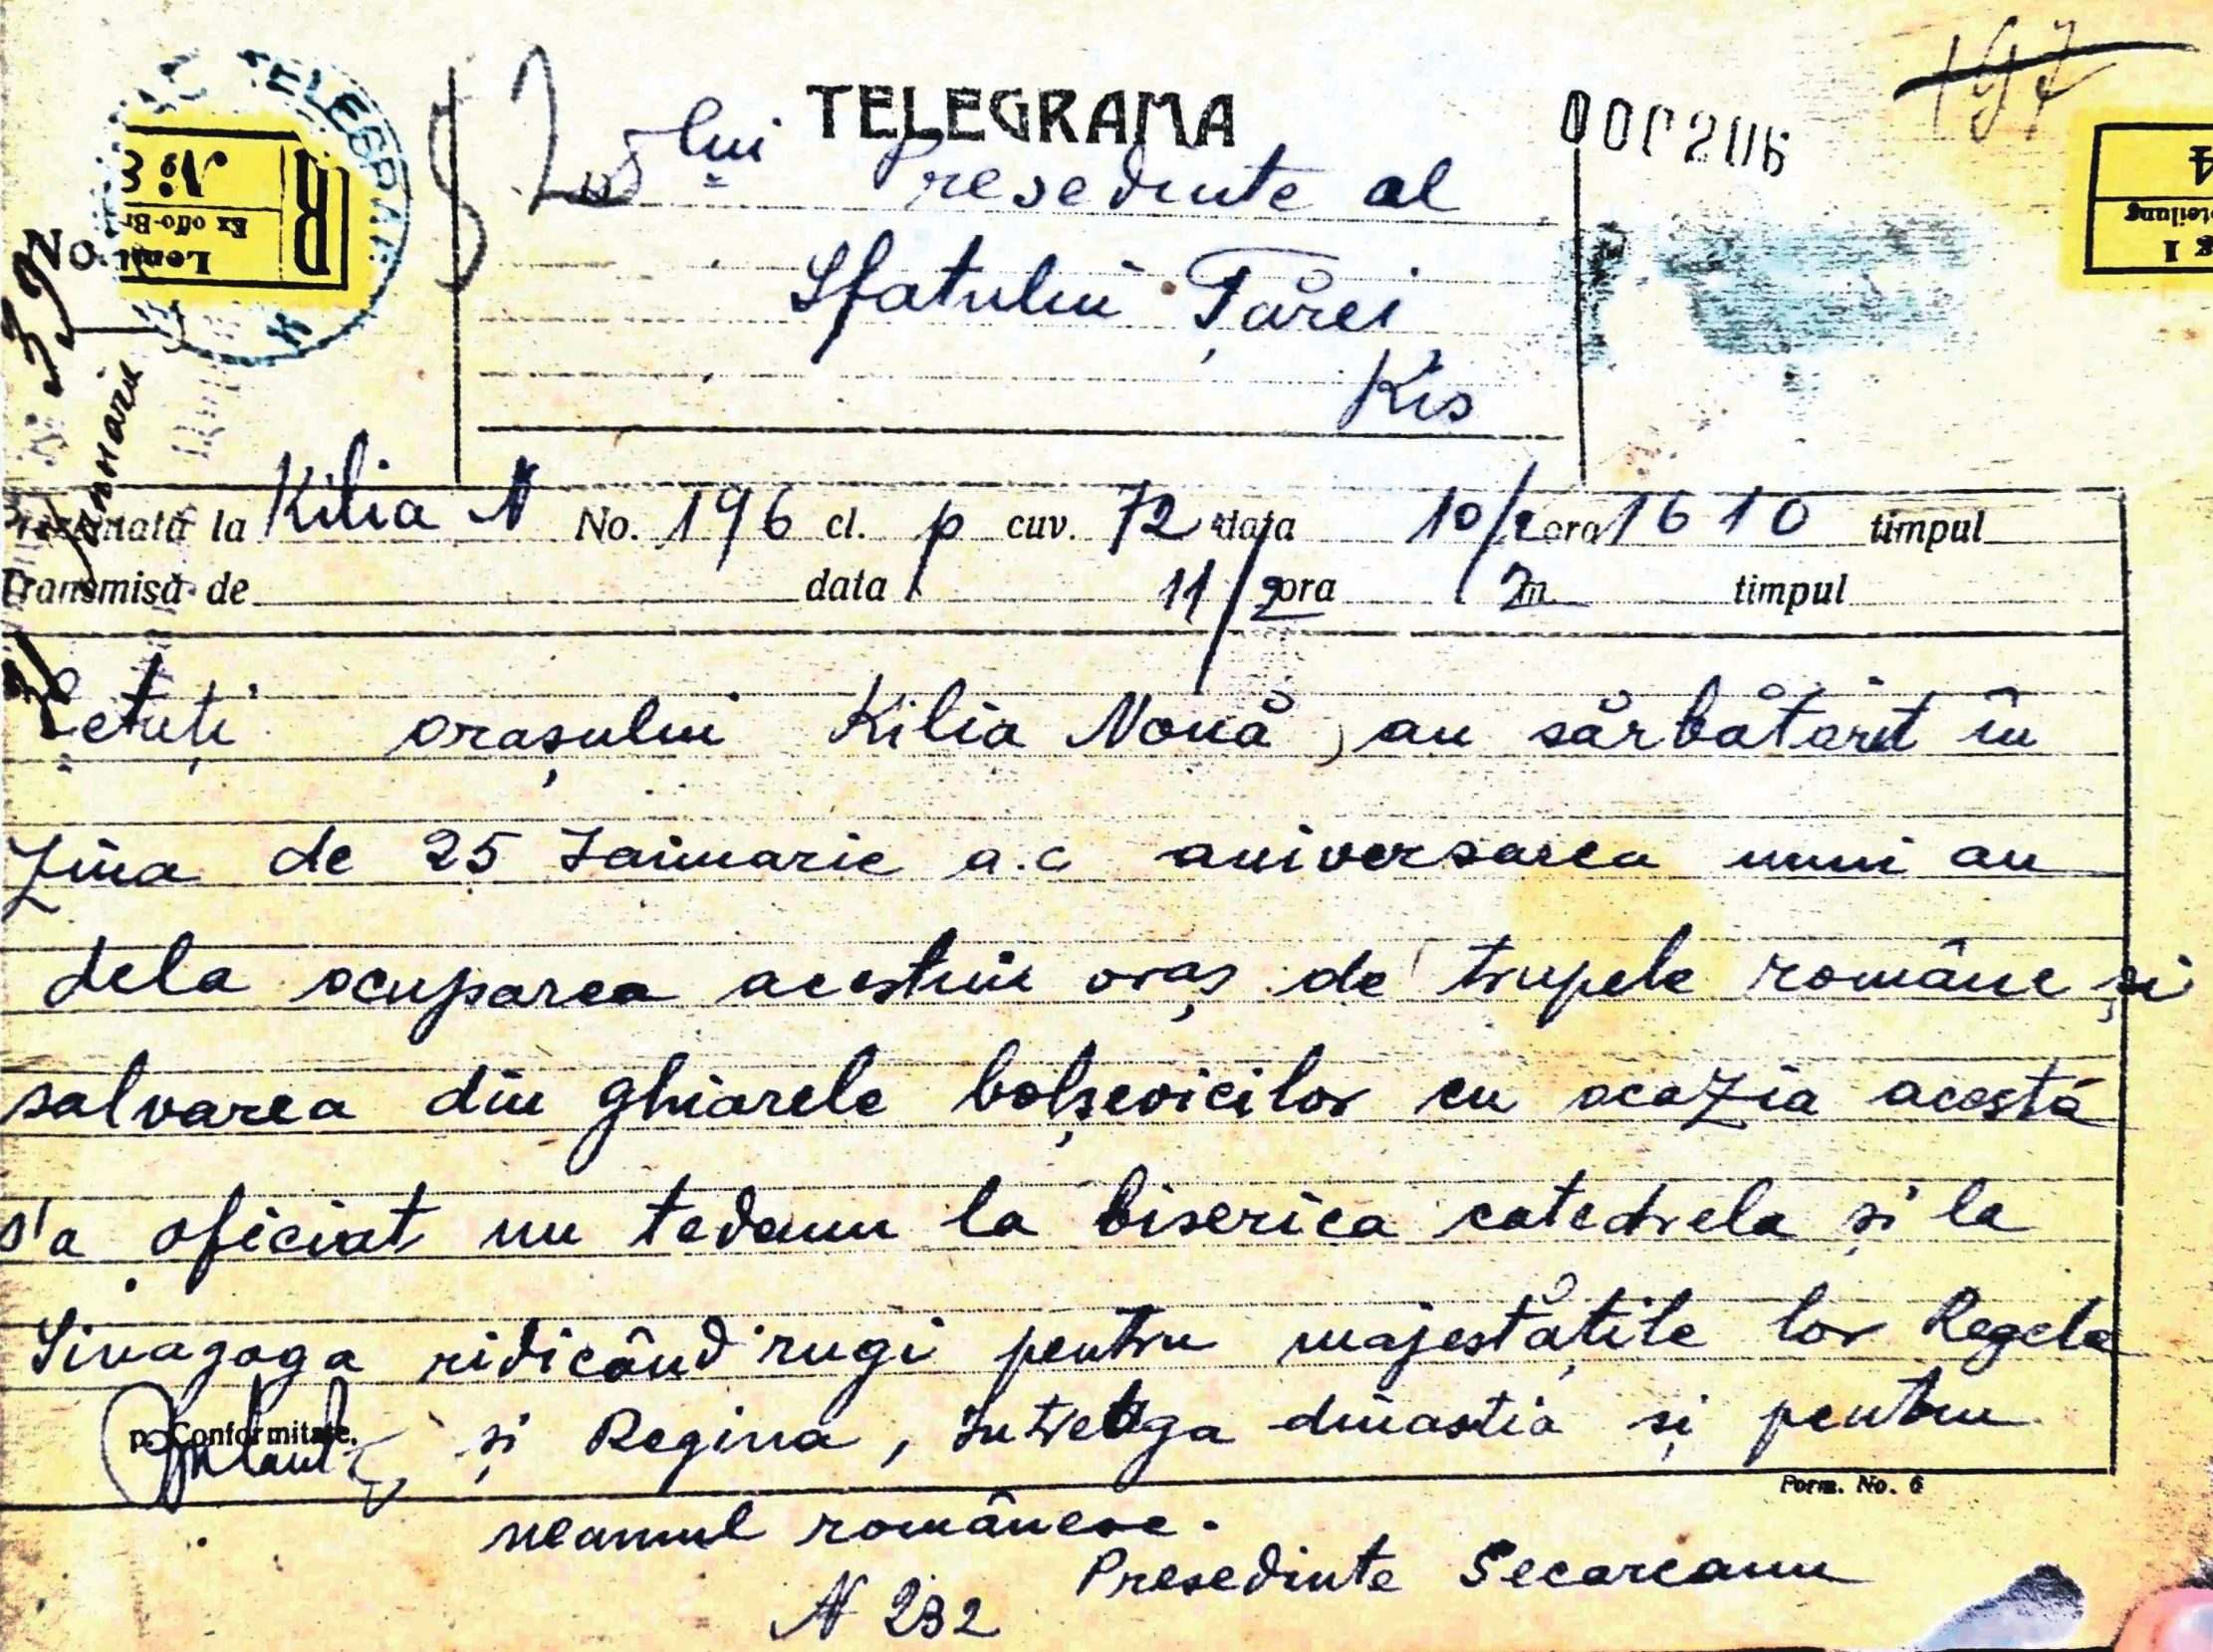 A telegram sent to the President of the Councils of the Country, in which it is reported about the celebration a year after the liberation of the city of Chilia Noua by the Romanian army "and the salvation from the claws of the Bolsheviks" (ANRM)